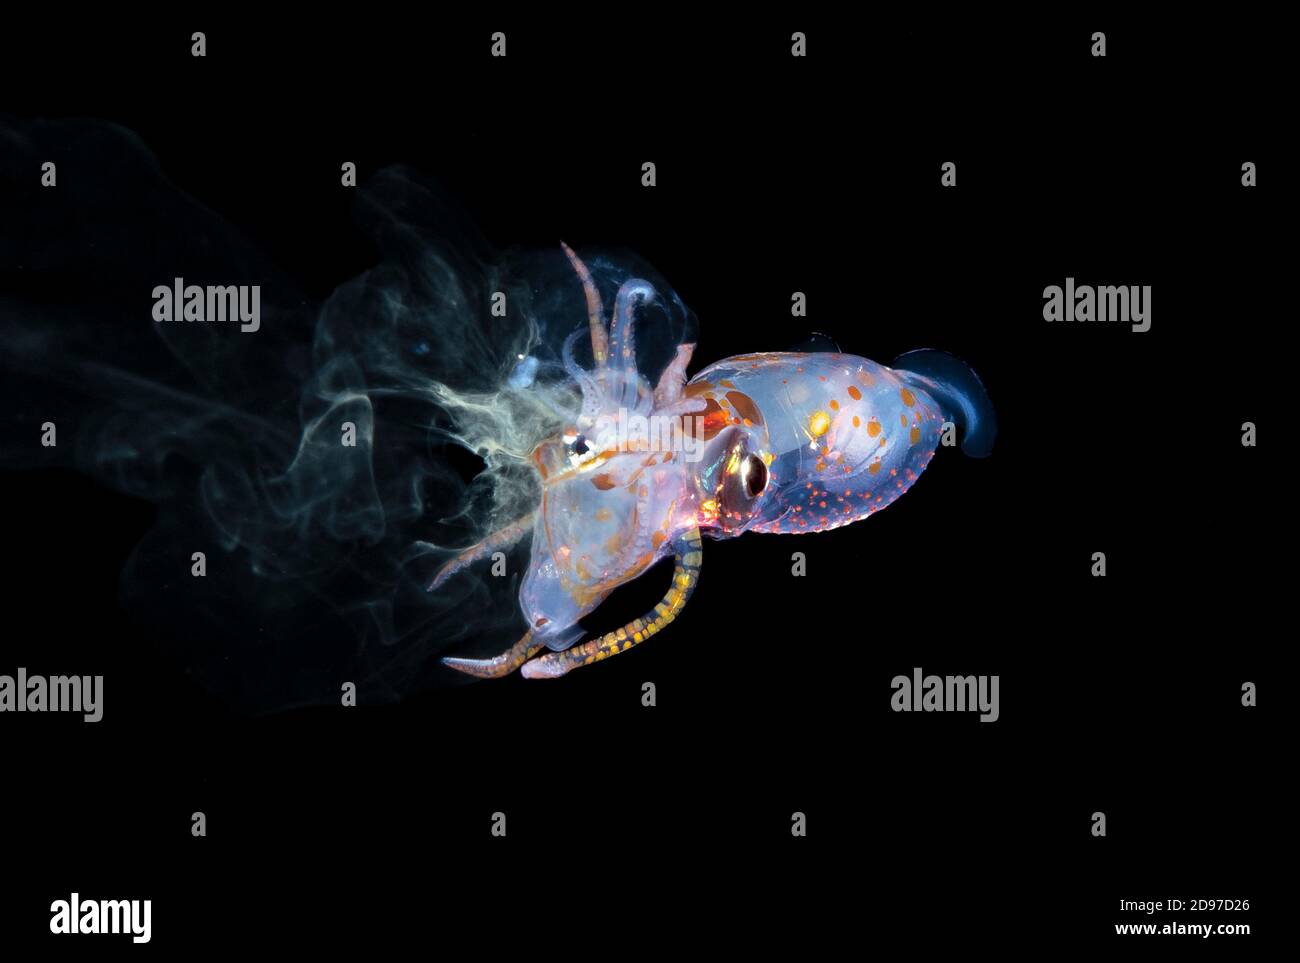 Cannibalism. a juvenile Histioteuthid Squid attacking and eating a paralarval Pyroteuthid Squid, The poor victim is inking in a futile defensive manuv Stock Photo